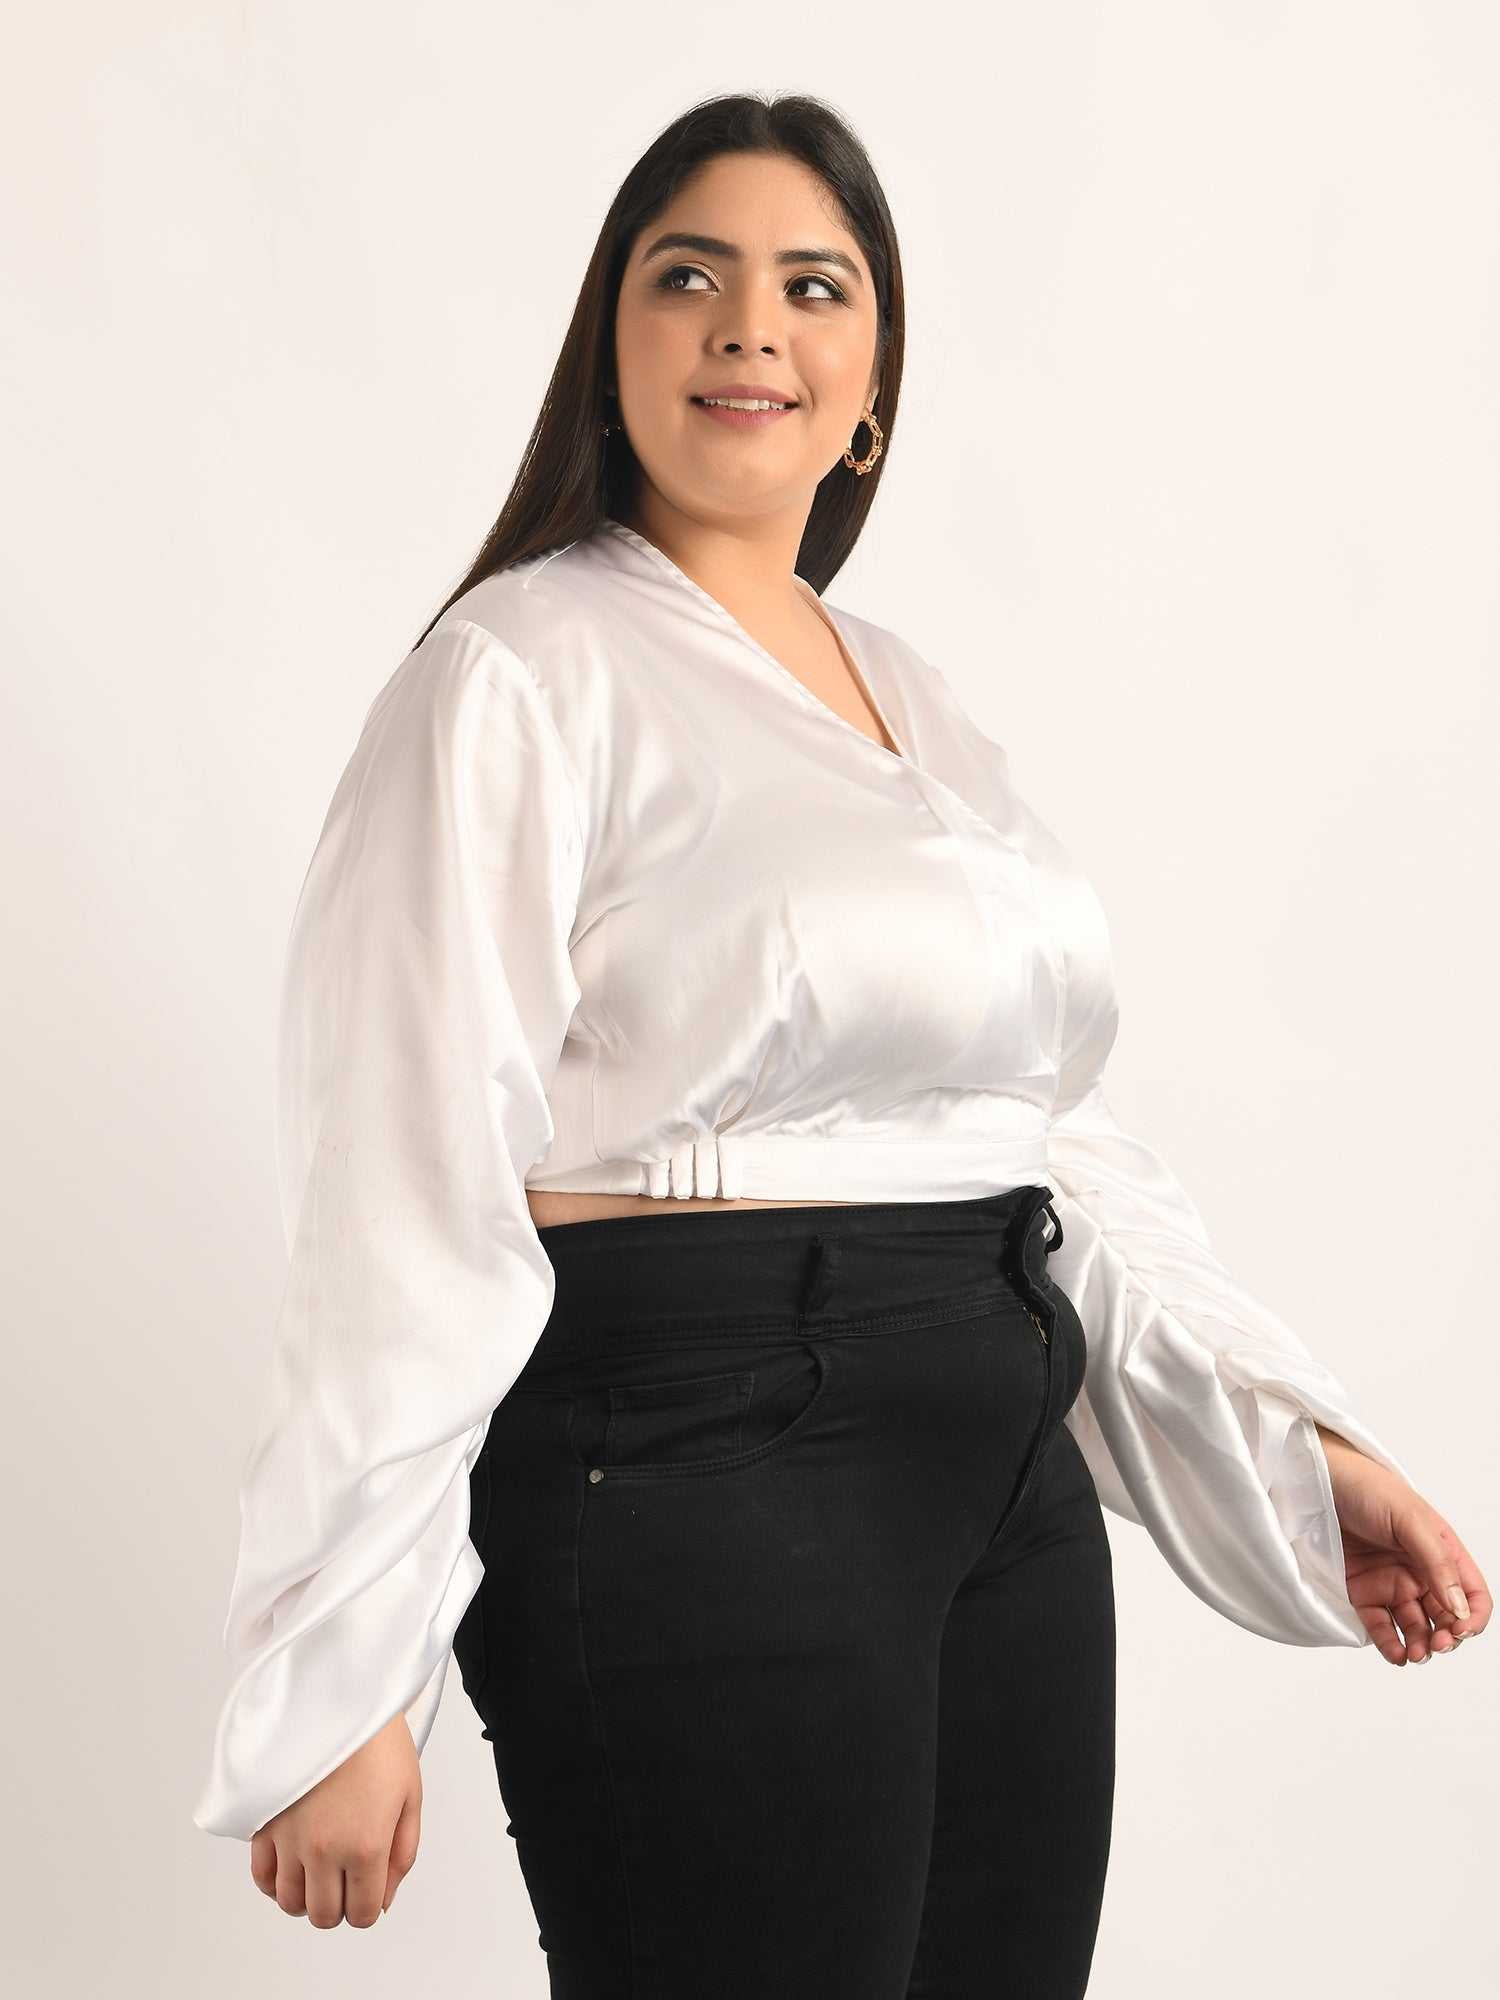 attic curves folksy pearl white satiny crop top